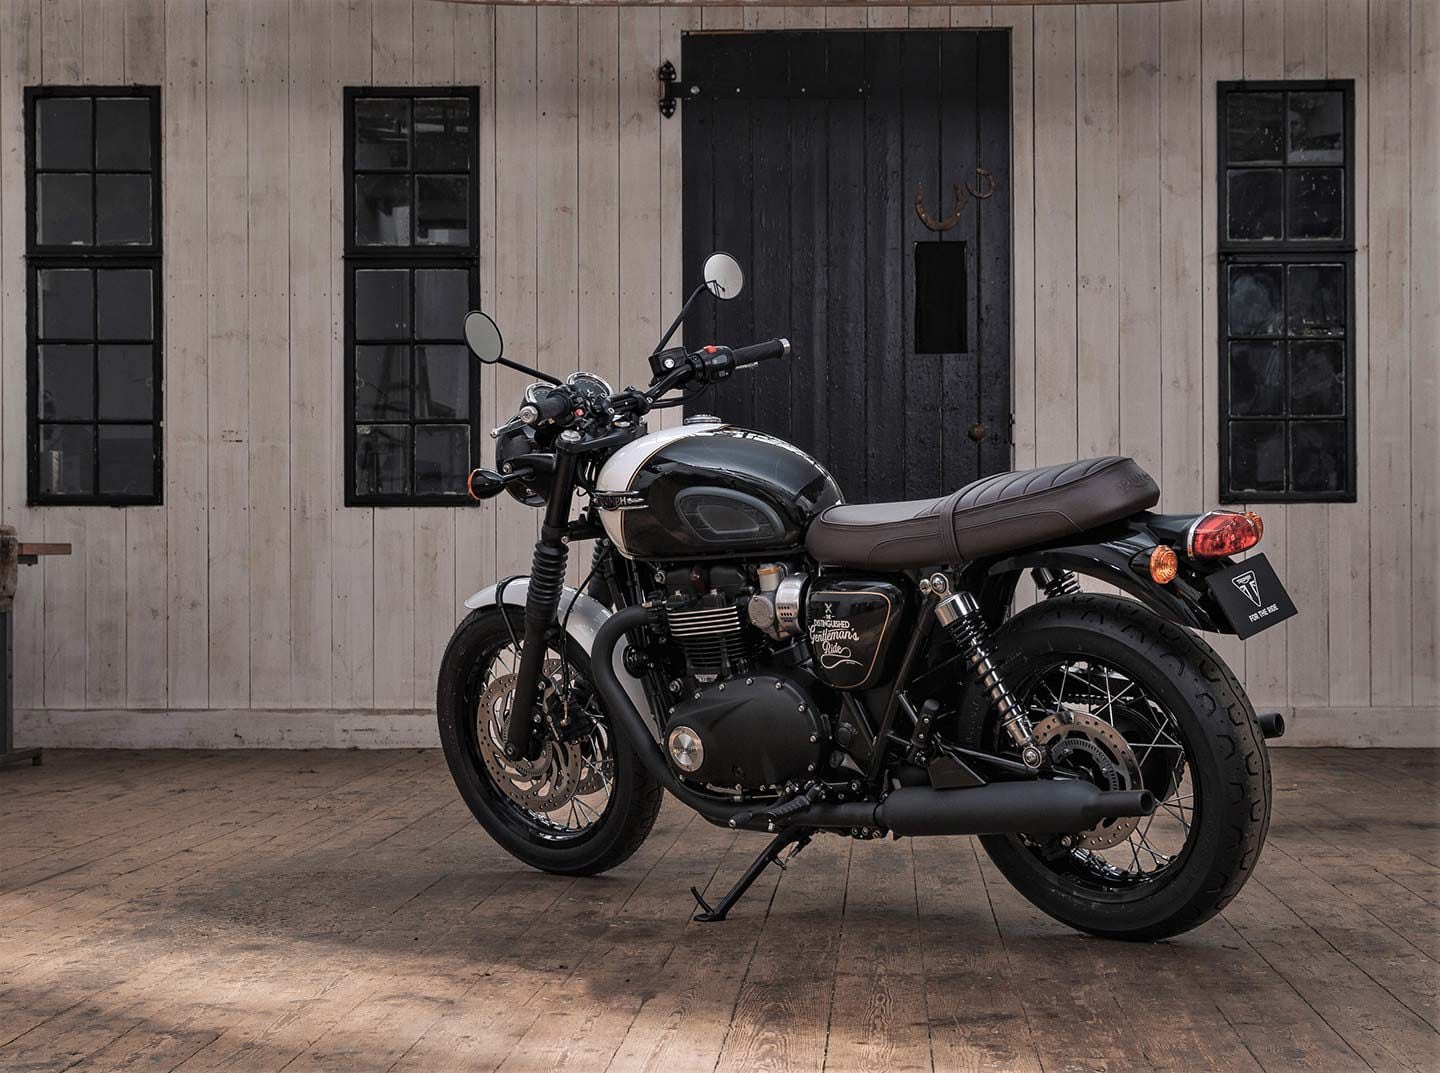 Other than the tank and front fender, the DGR bike retains much of the stock T120 Black’s blacked out treatment.